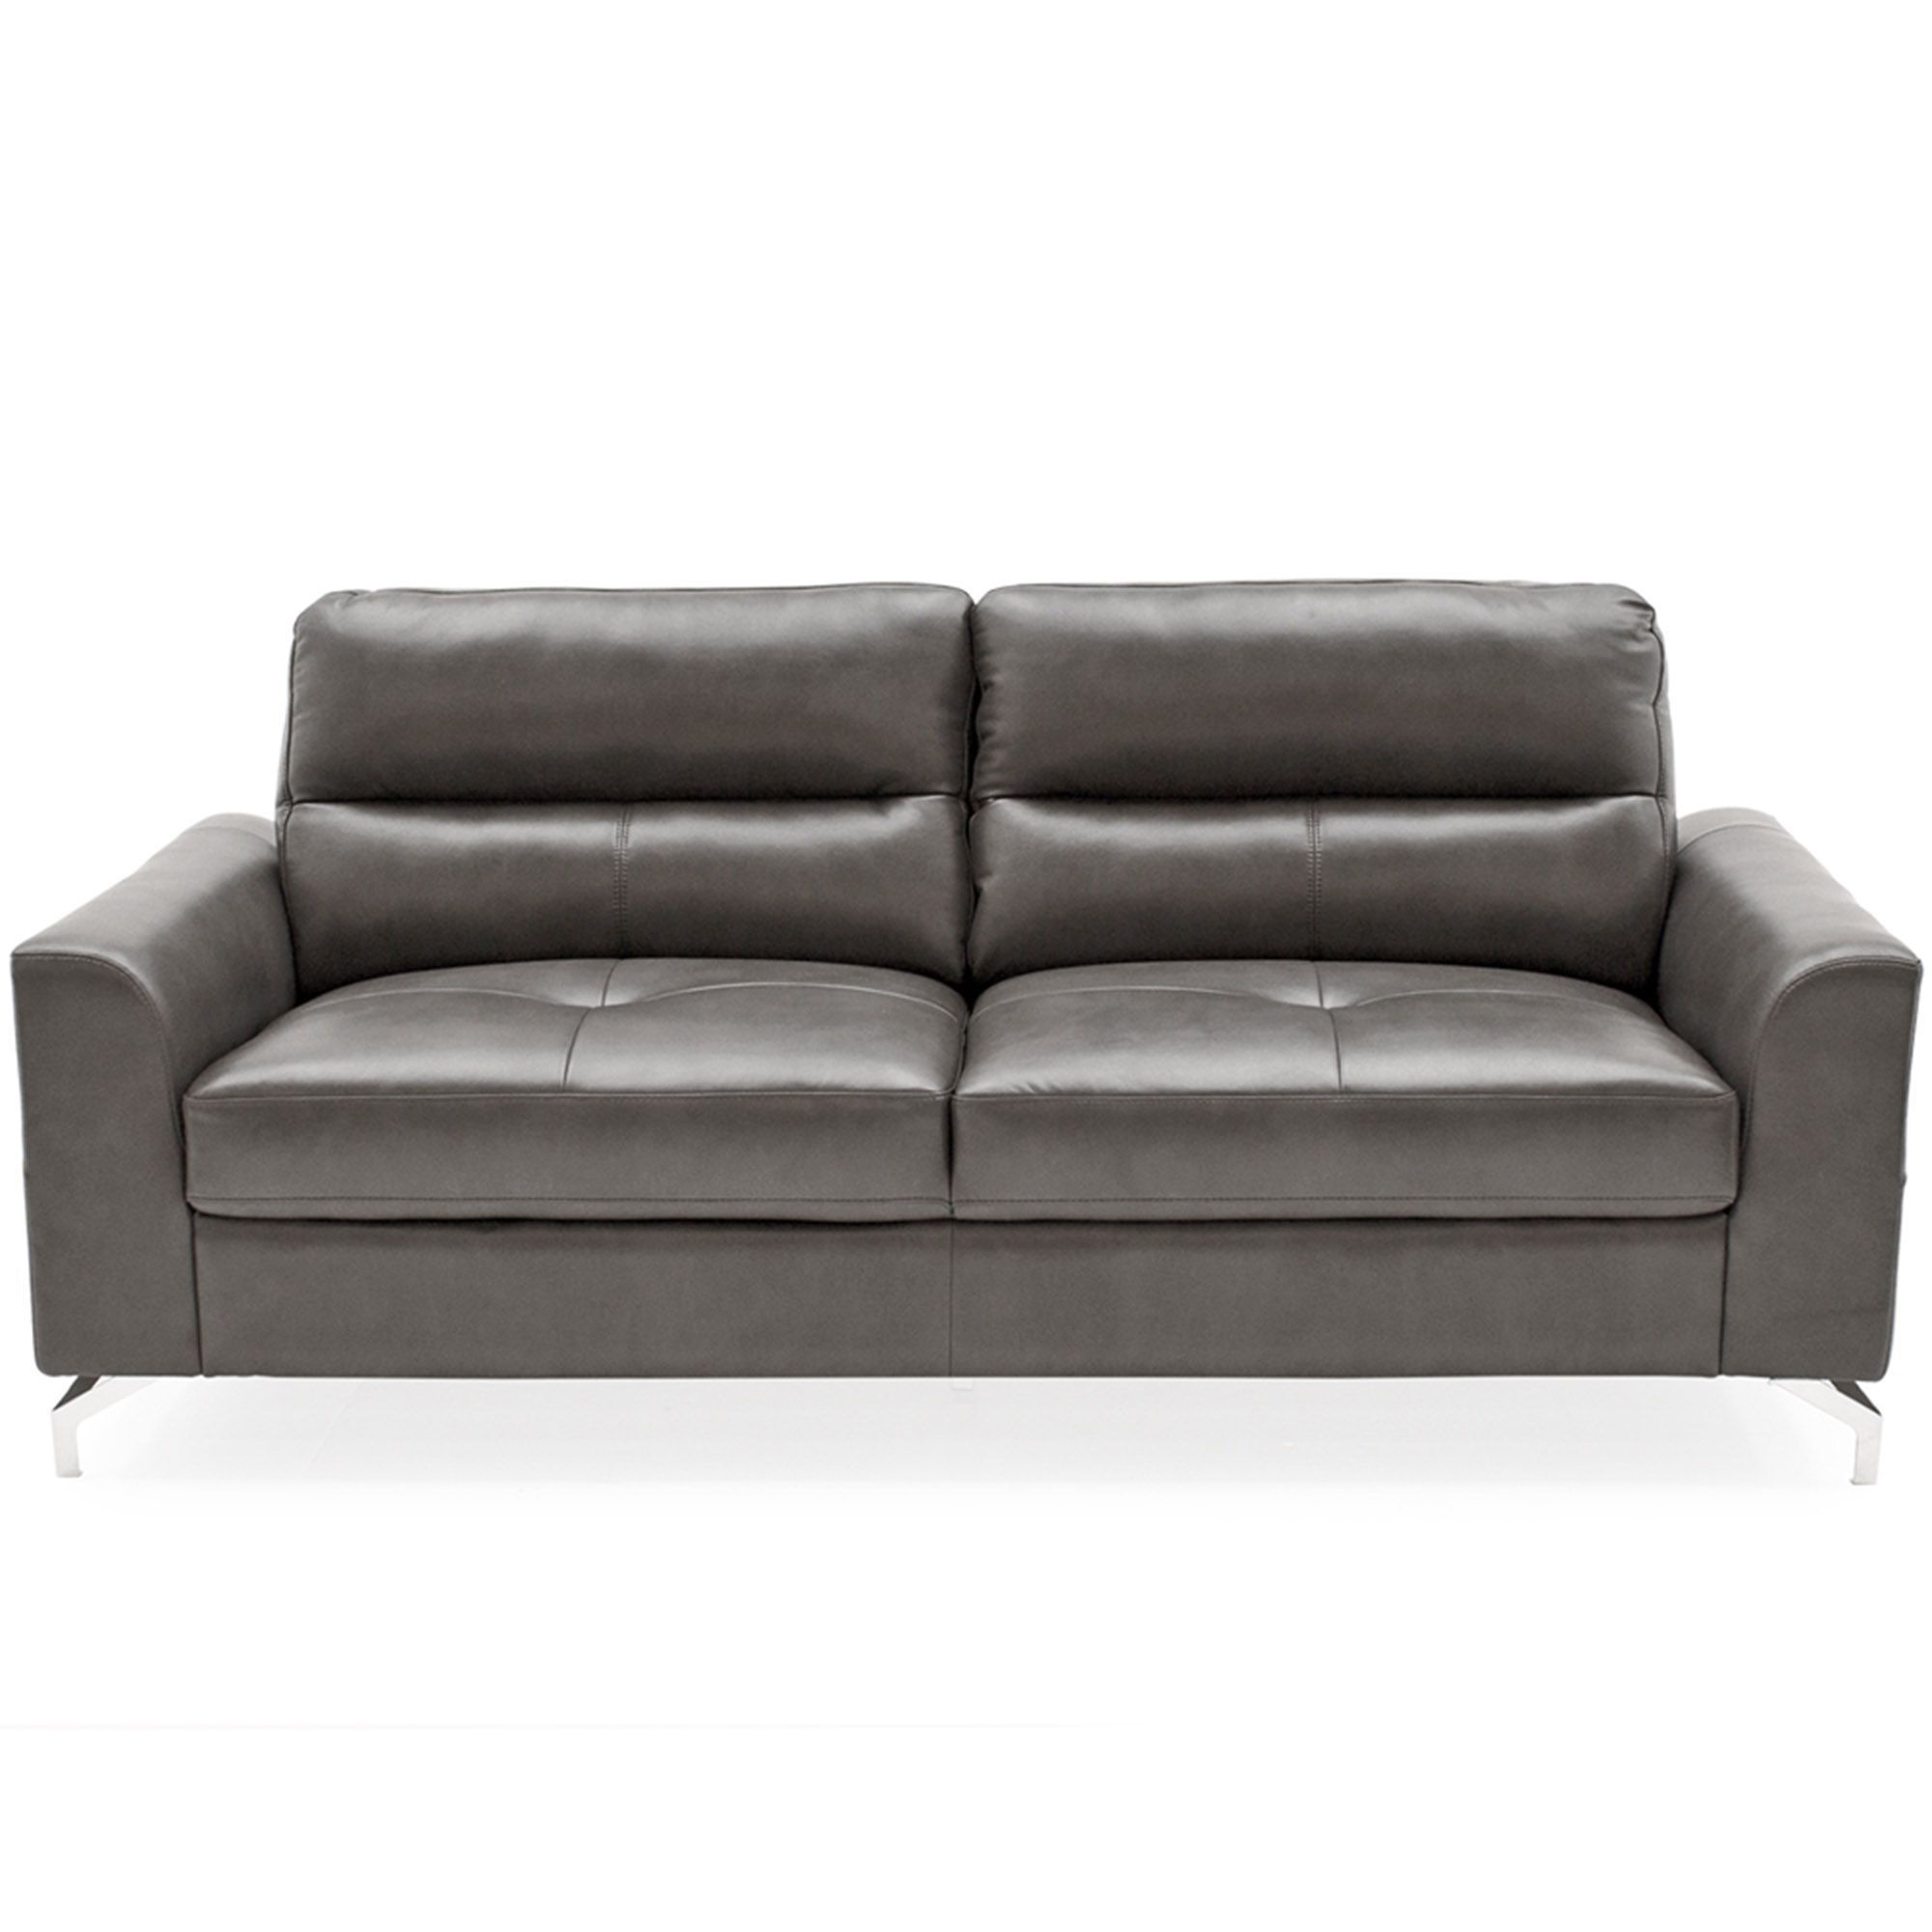 Lambro 3 Seater Sofa Grey Faux Leather – All Sofa Collections – Meubles Intended For Traditional 3 Seater Faux Leather Sofas (View 16 of 20)